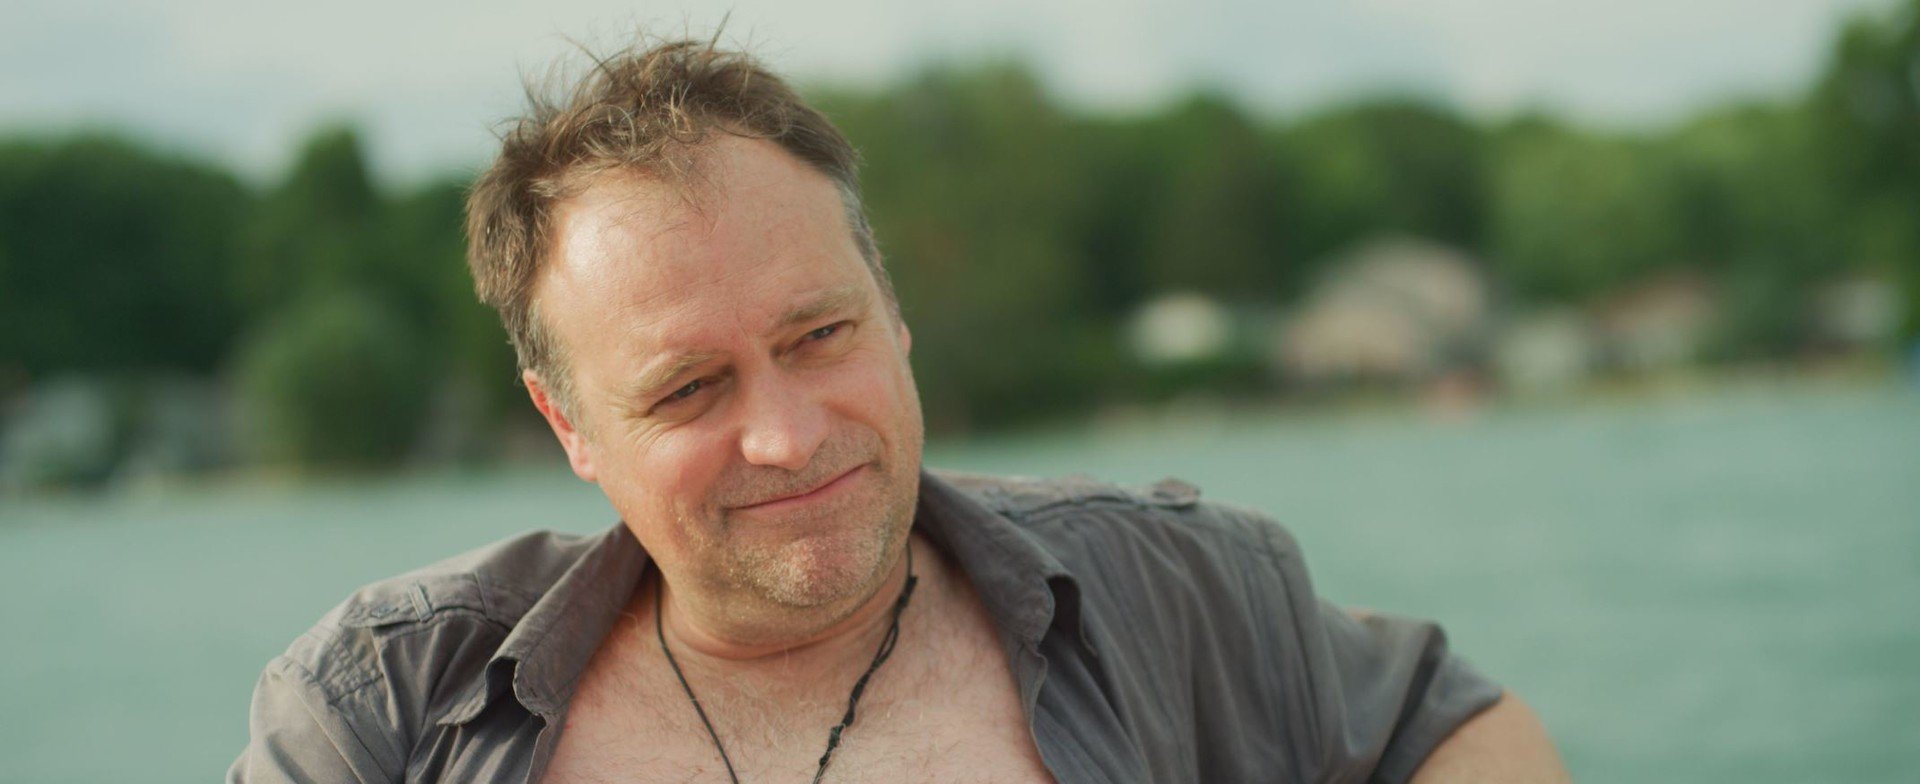 David Hewlett in All About Who You Know.jpg